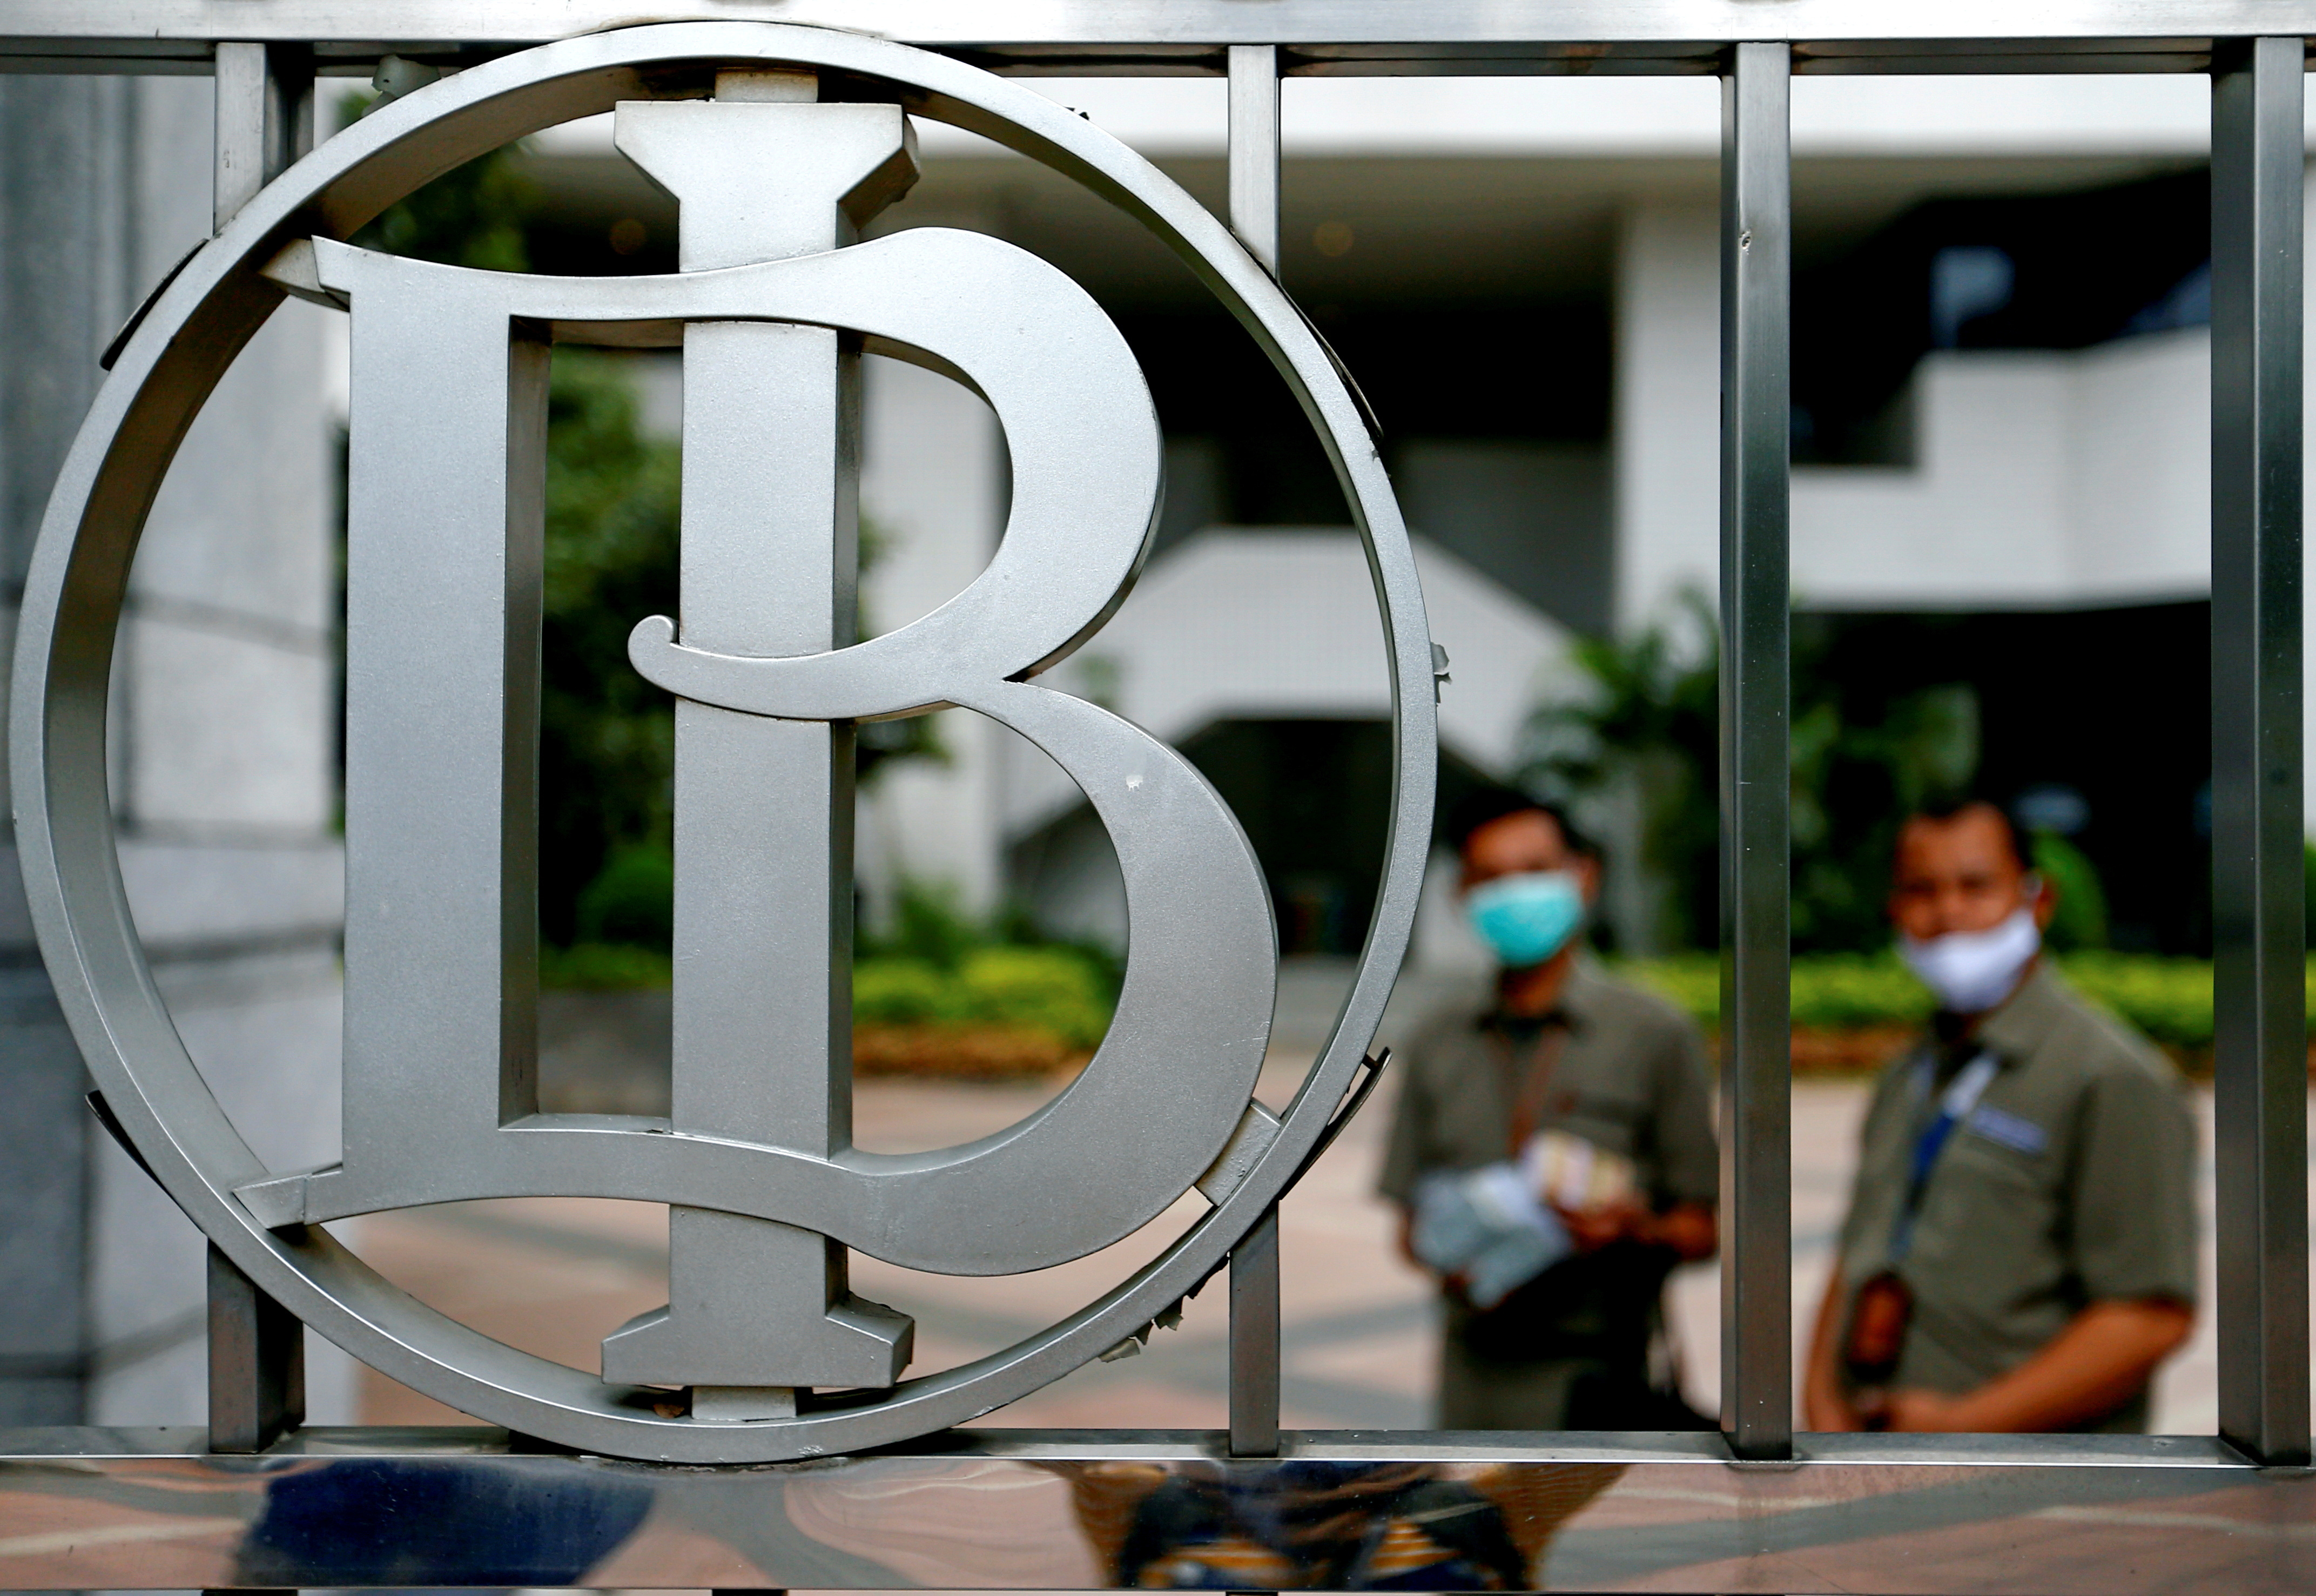 Bank Indonesia's logo is seen at Bank Indonesia headquarters